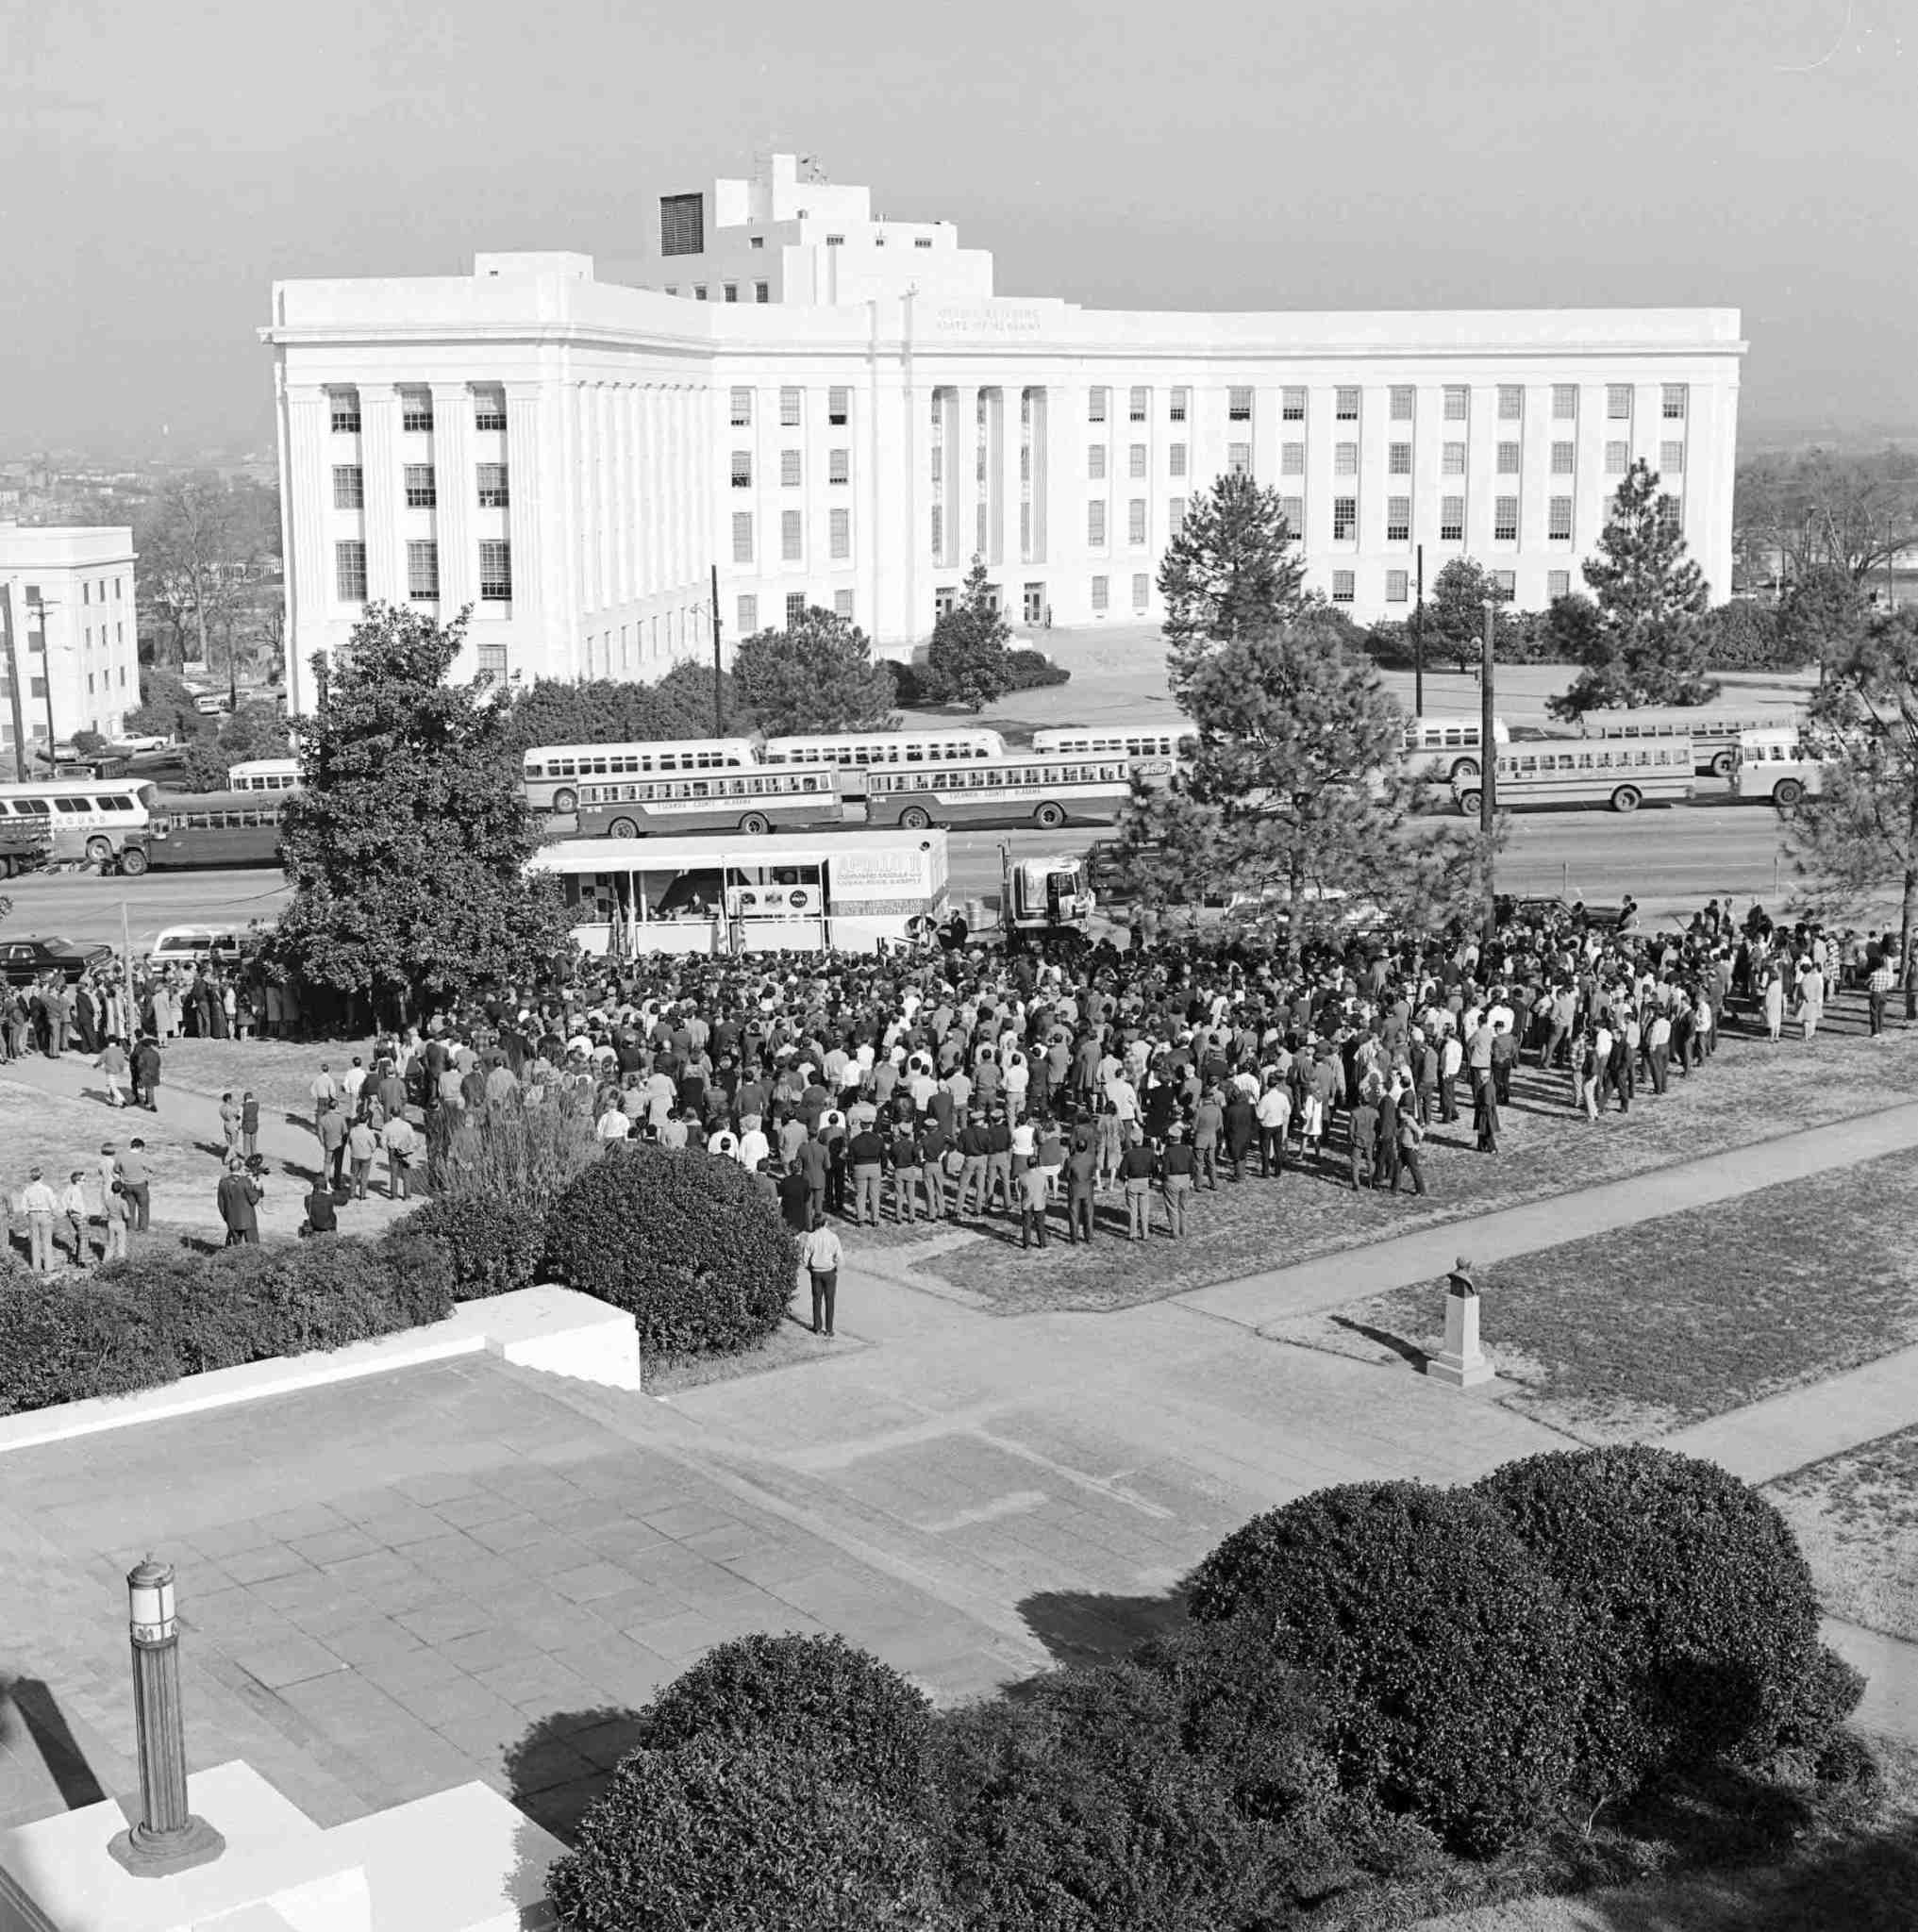 A crowd of visitors gather on the grounds of the Alabama Capitol Building in Montgomery to the see the Apollo 11 command module.